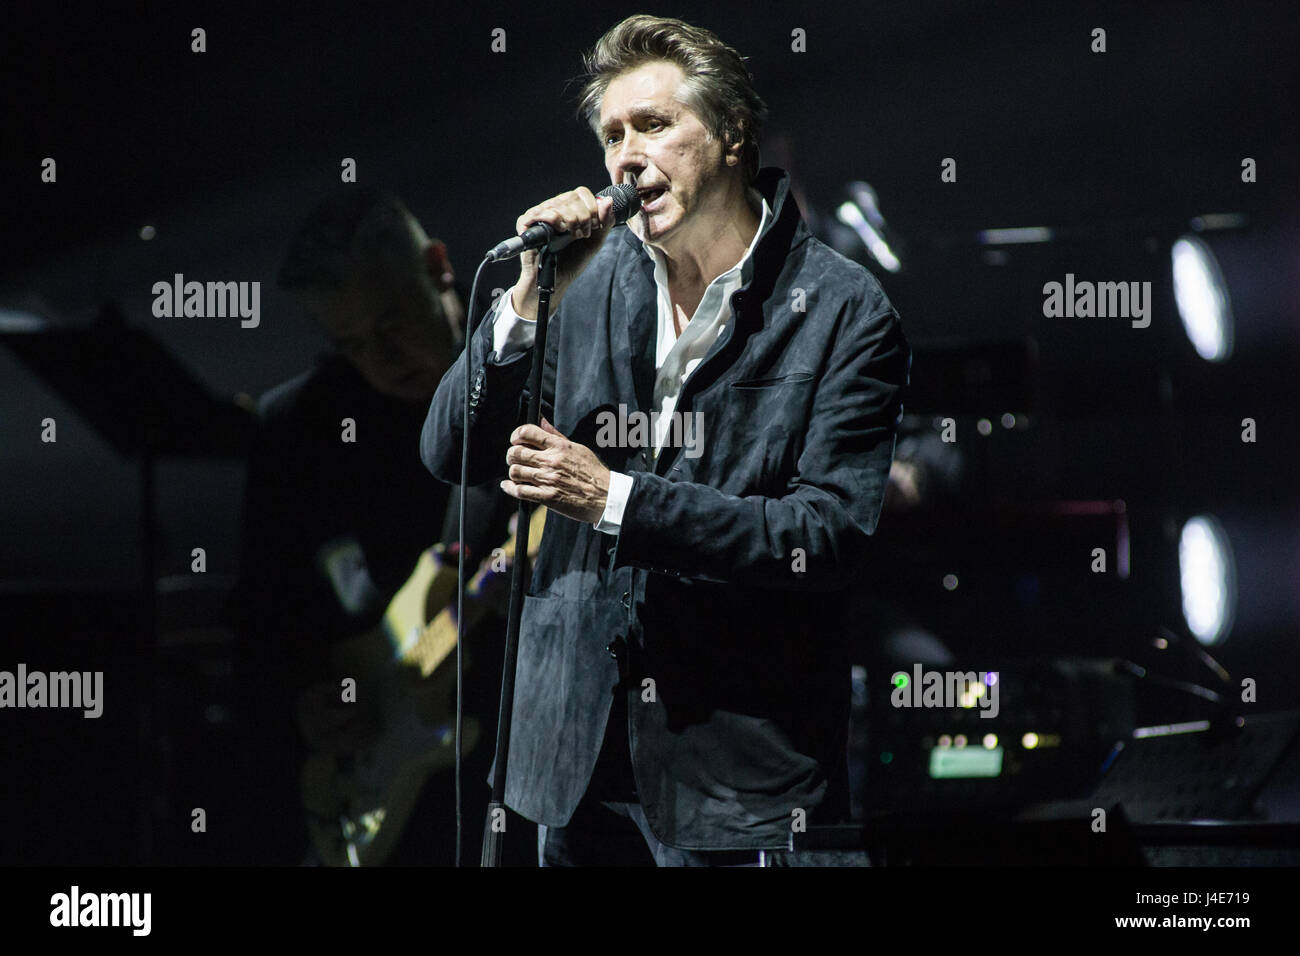 Milan Italy. 11th May 2017. The English singer-songwriter BRYAN FERRY performs live on stage at Teatro Degli Arcimboldi during the 'World Tour 2017' Credit: Rodolfo Sassano/Alamy Live News Stock Photo